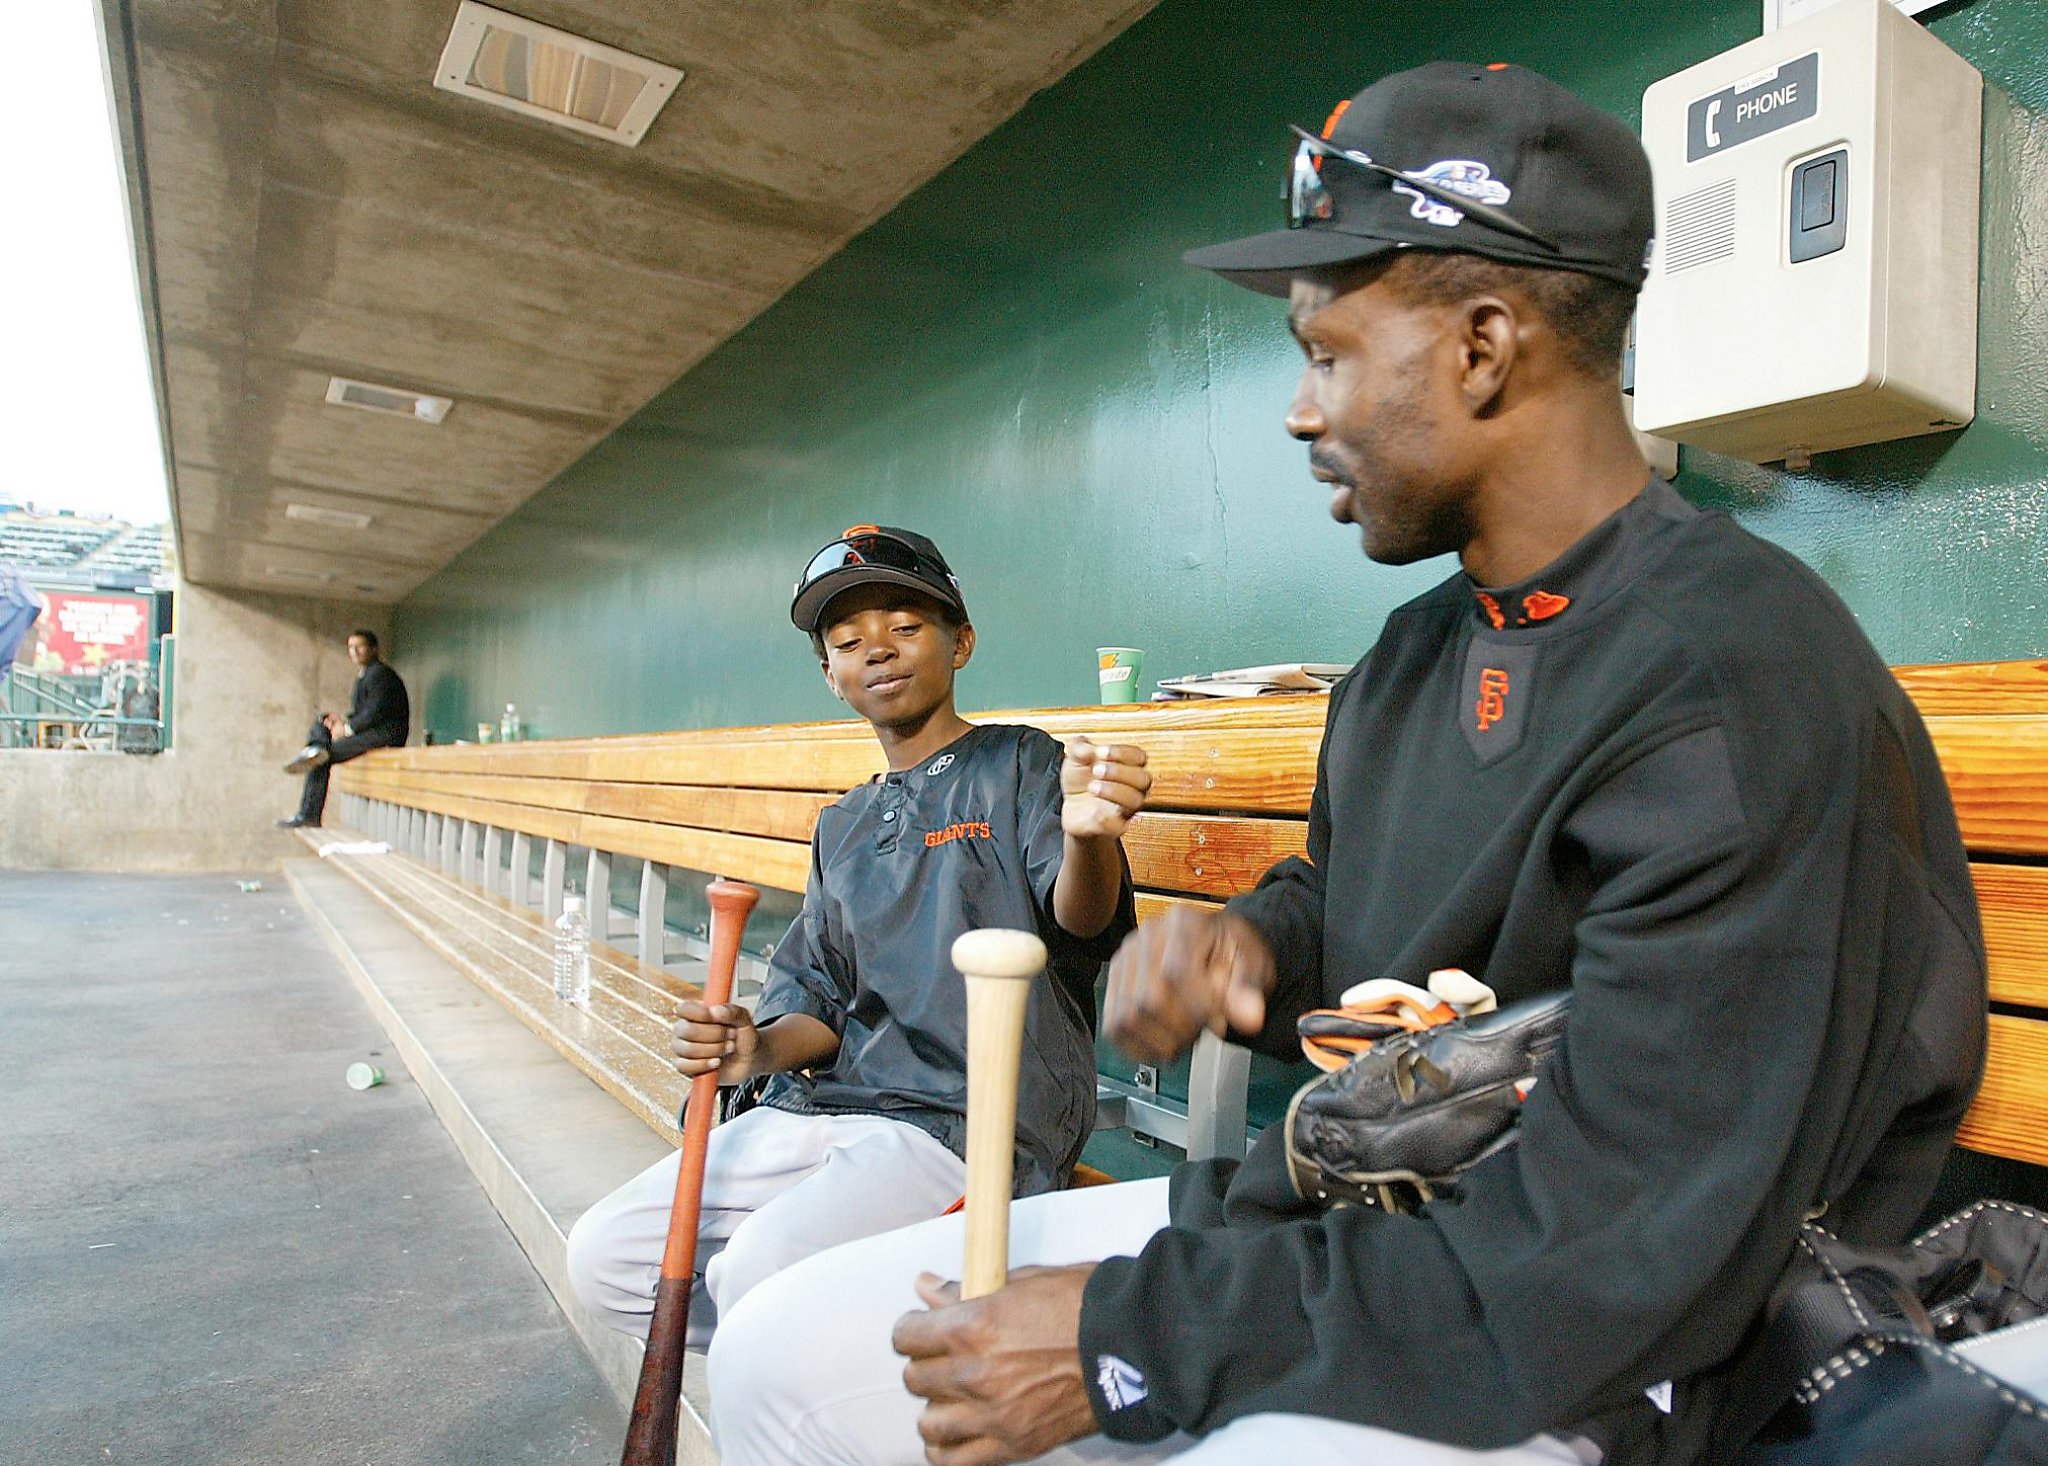 Giants coach Shawon Dunston still pained by 2002 World Series loss